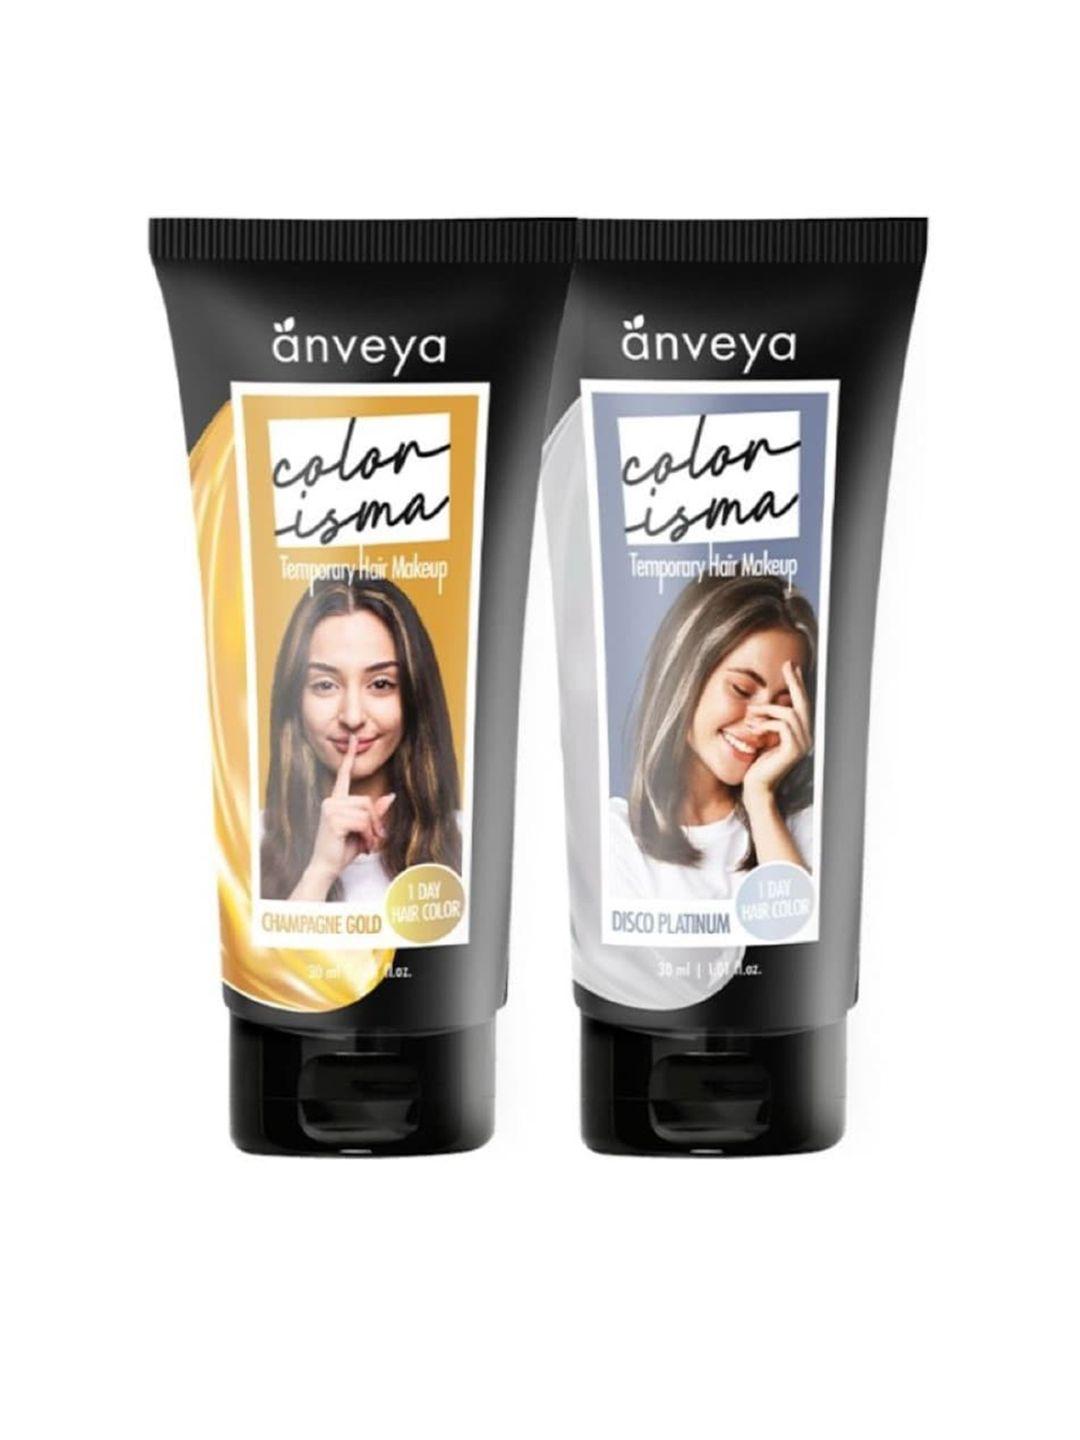 anveya set of 2 colorisma temporary hair color 30 ml each - champagnegold & discoplatinum